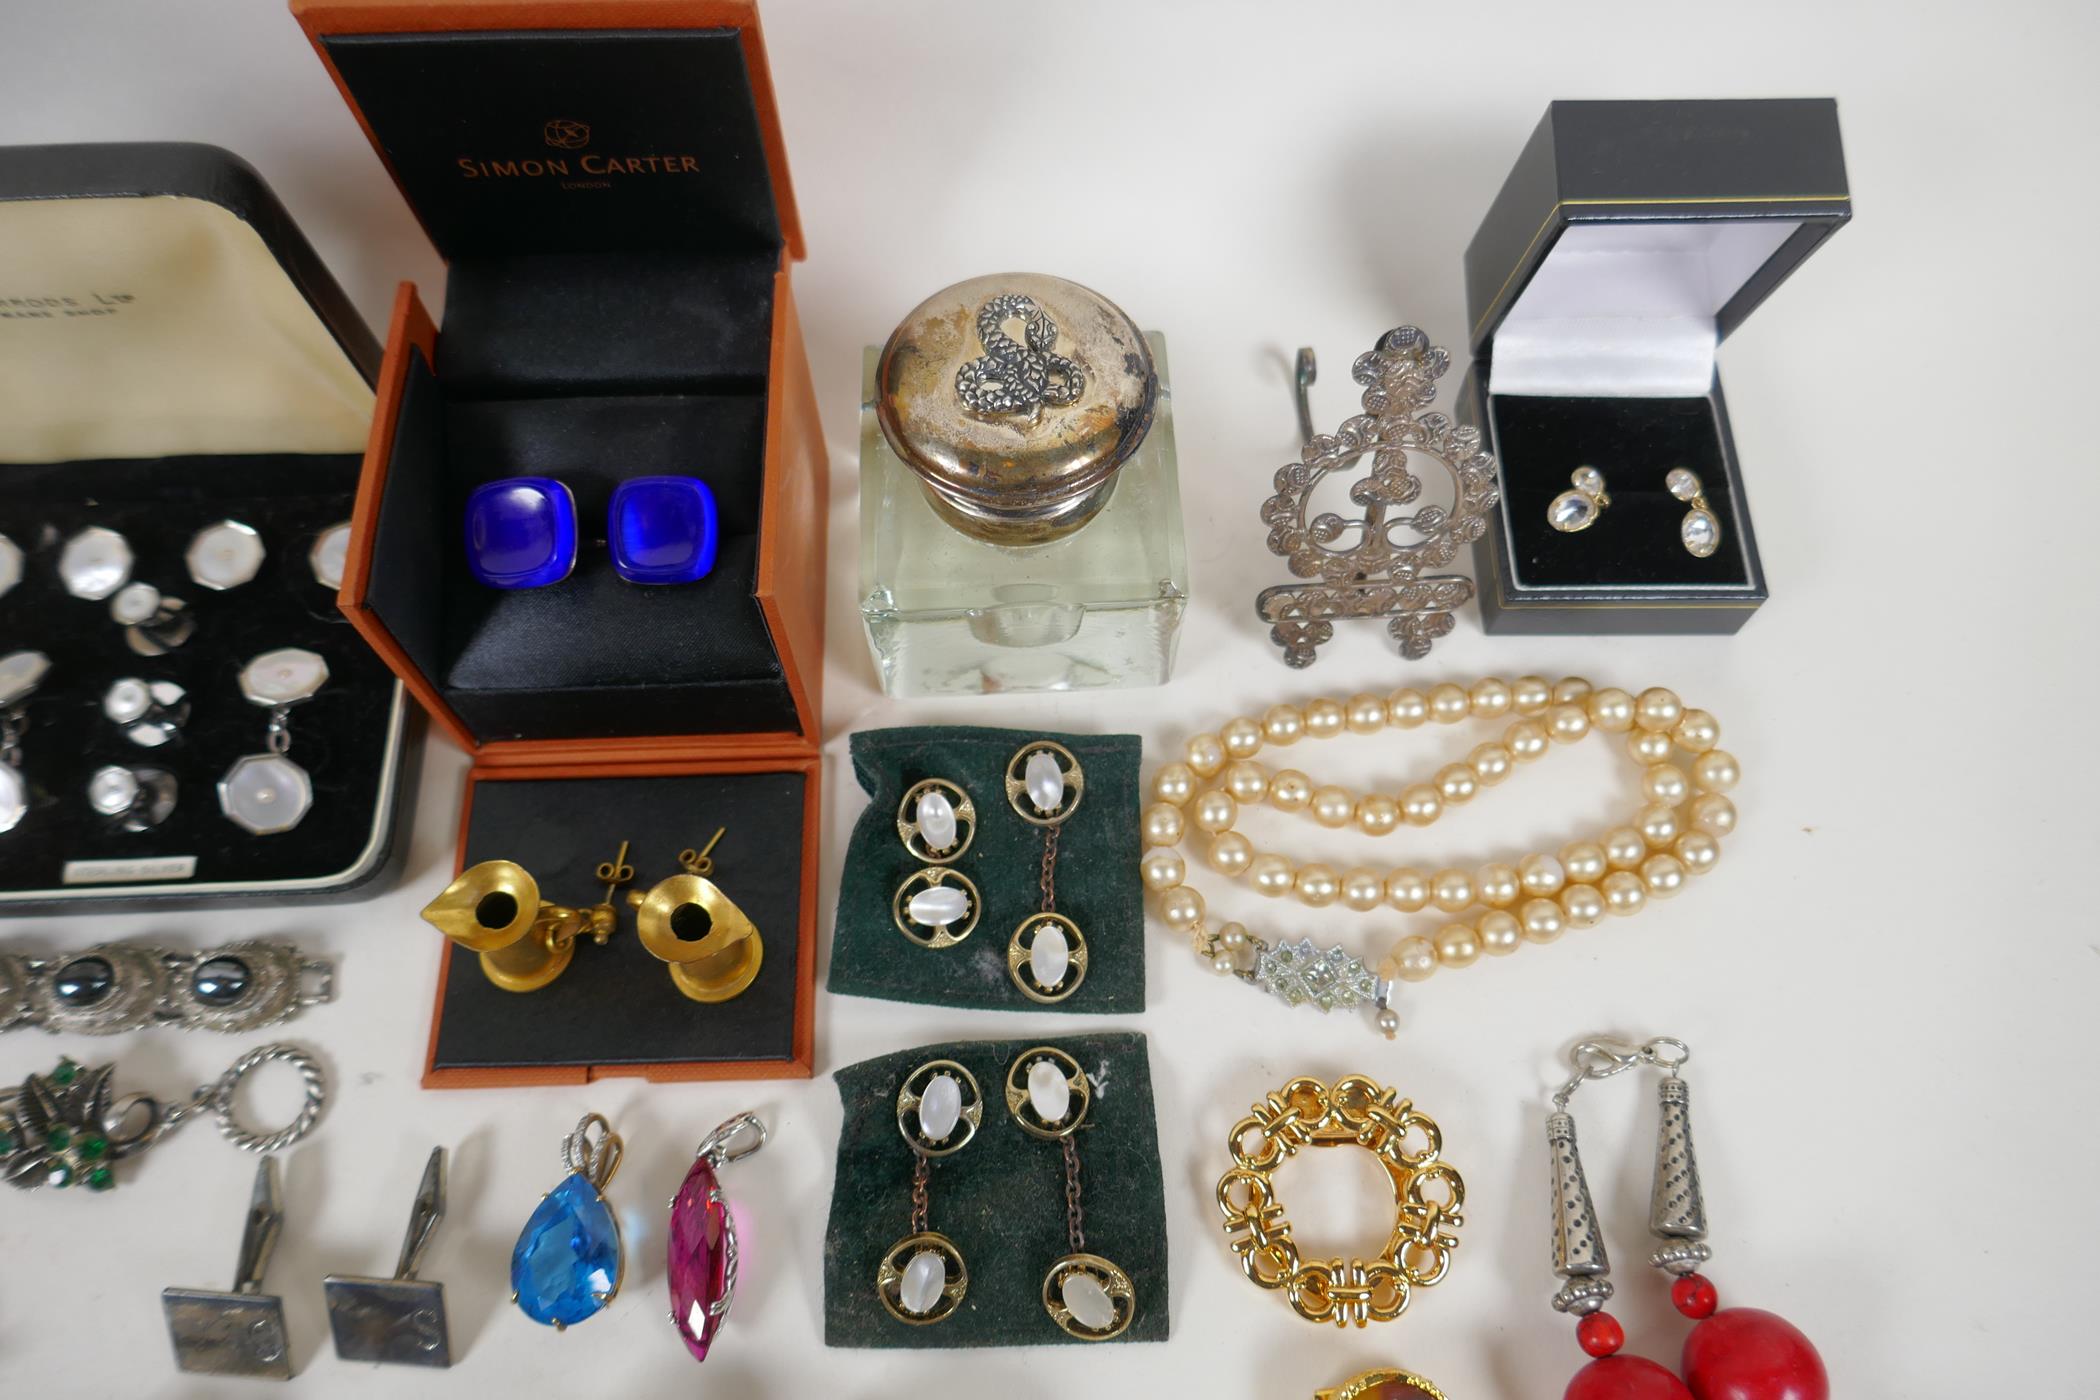 A collection of good quality vintage costume jewellery including brooches, necklaces, earrings, - Image 2 of 8